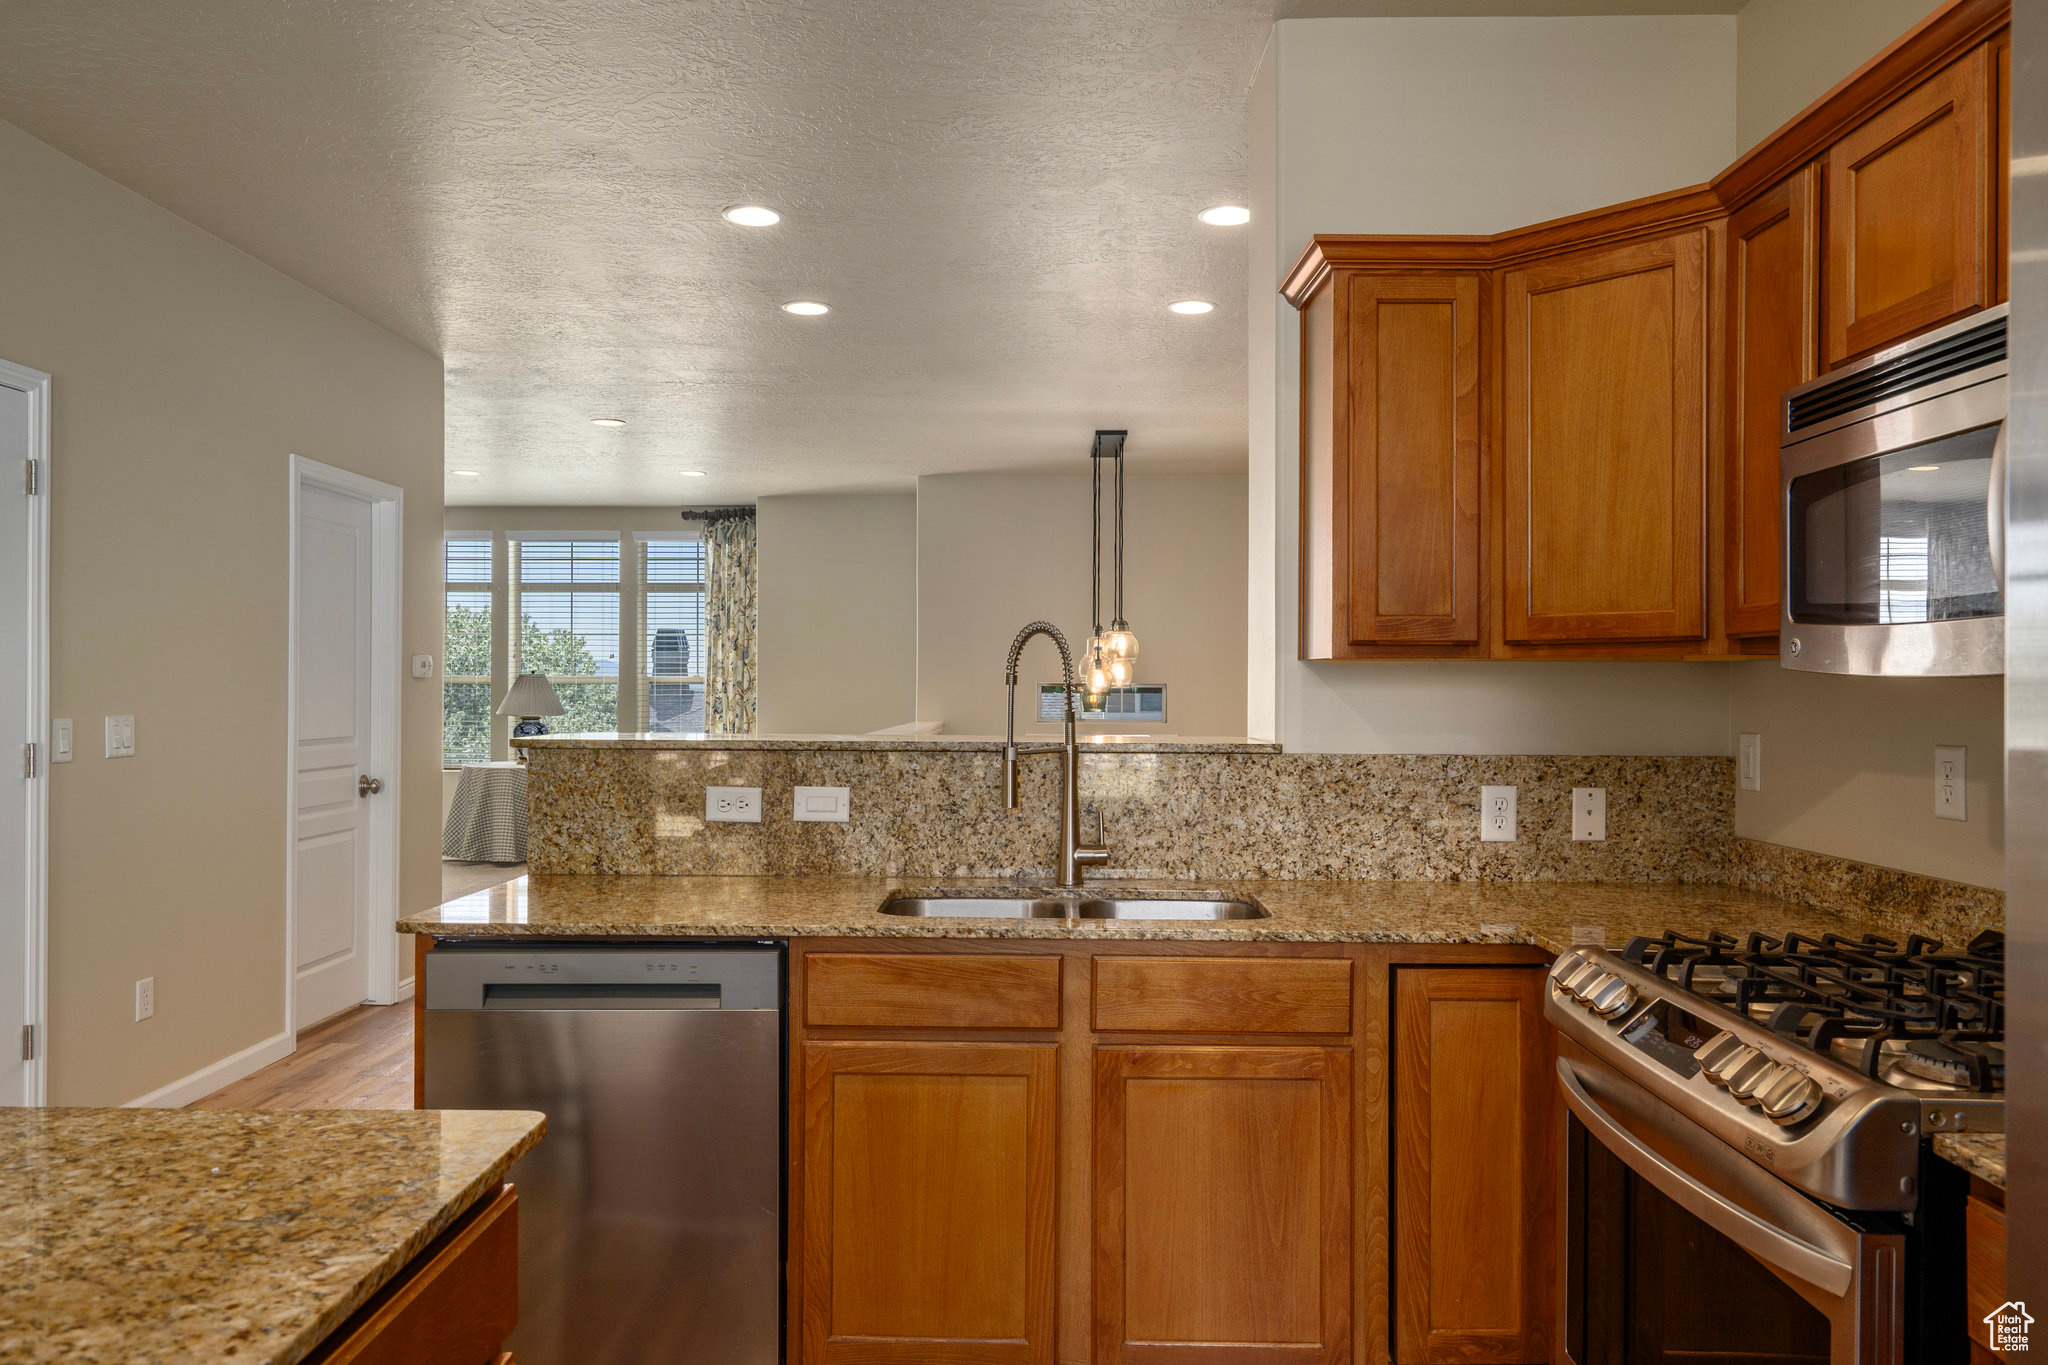 Kitchen with appliances with stainless steel finishes, a textured ceiling, light stone counters, sink, and light wood-type flooring